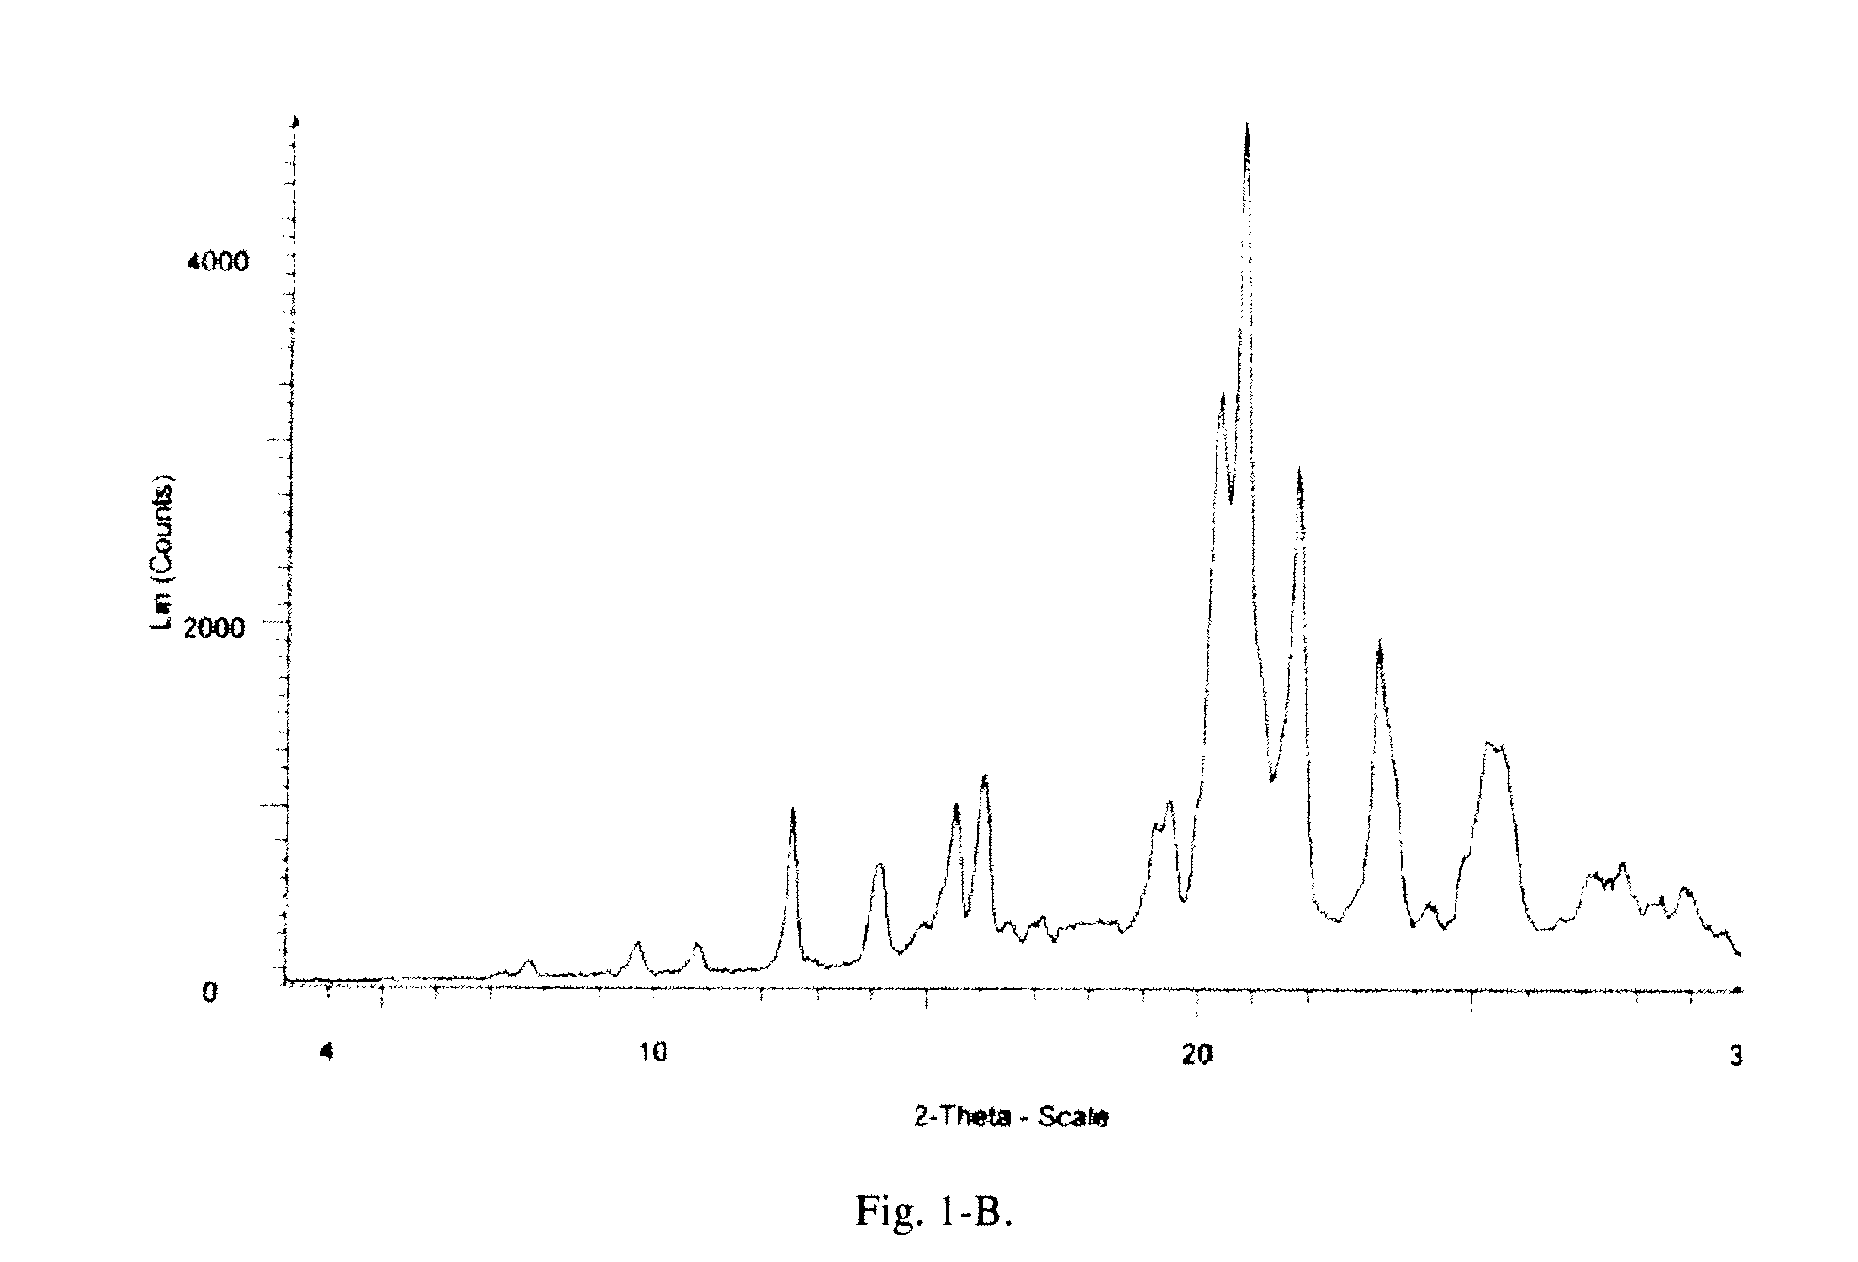 Crystalline Forms on N-[3-fluoro-4-({6-(methyloxy)-7-[(3-morpholin-4-ylpropyl)oxy]-quinolin-4-yl}oxy)phenyl]-N'-(4-fluorophenyl)cyclopropane-1,1-dicarboxamide